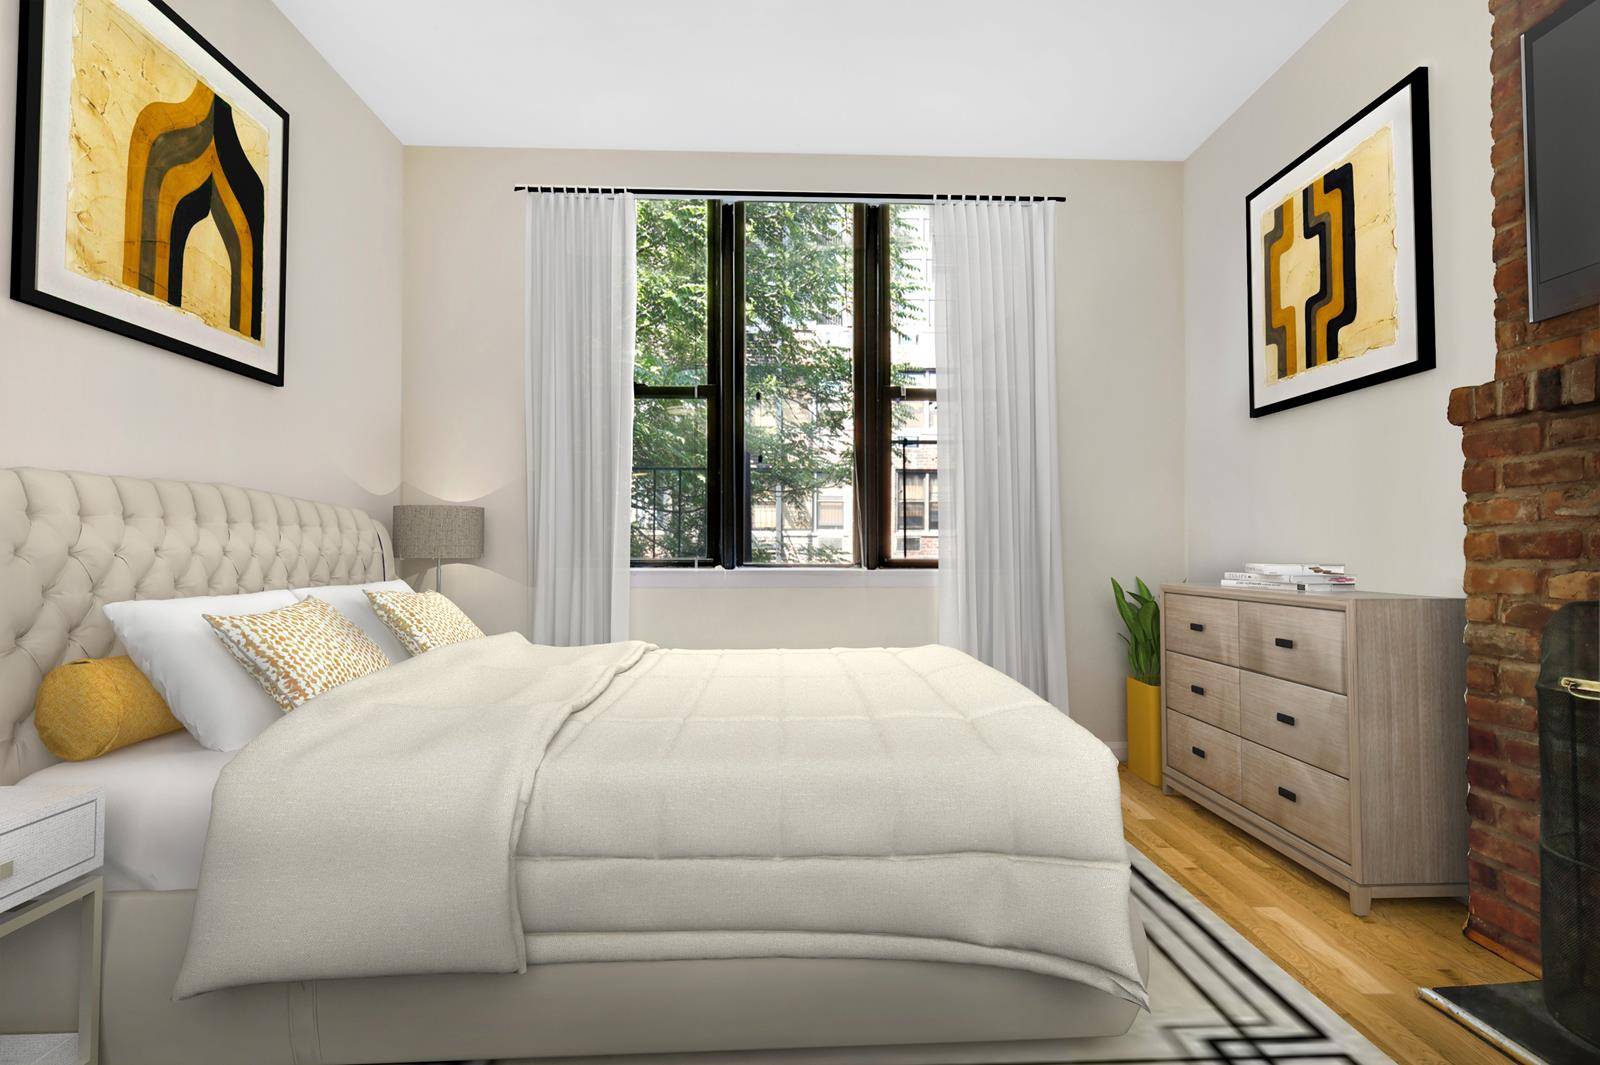 This is an incredible Bi Level studio that gives you the space of an uptown apartment, while still staying in the amazing neighborhood of Gramercy !